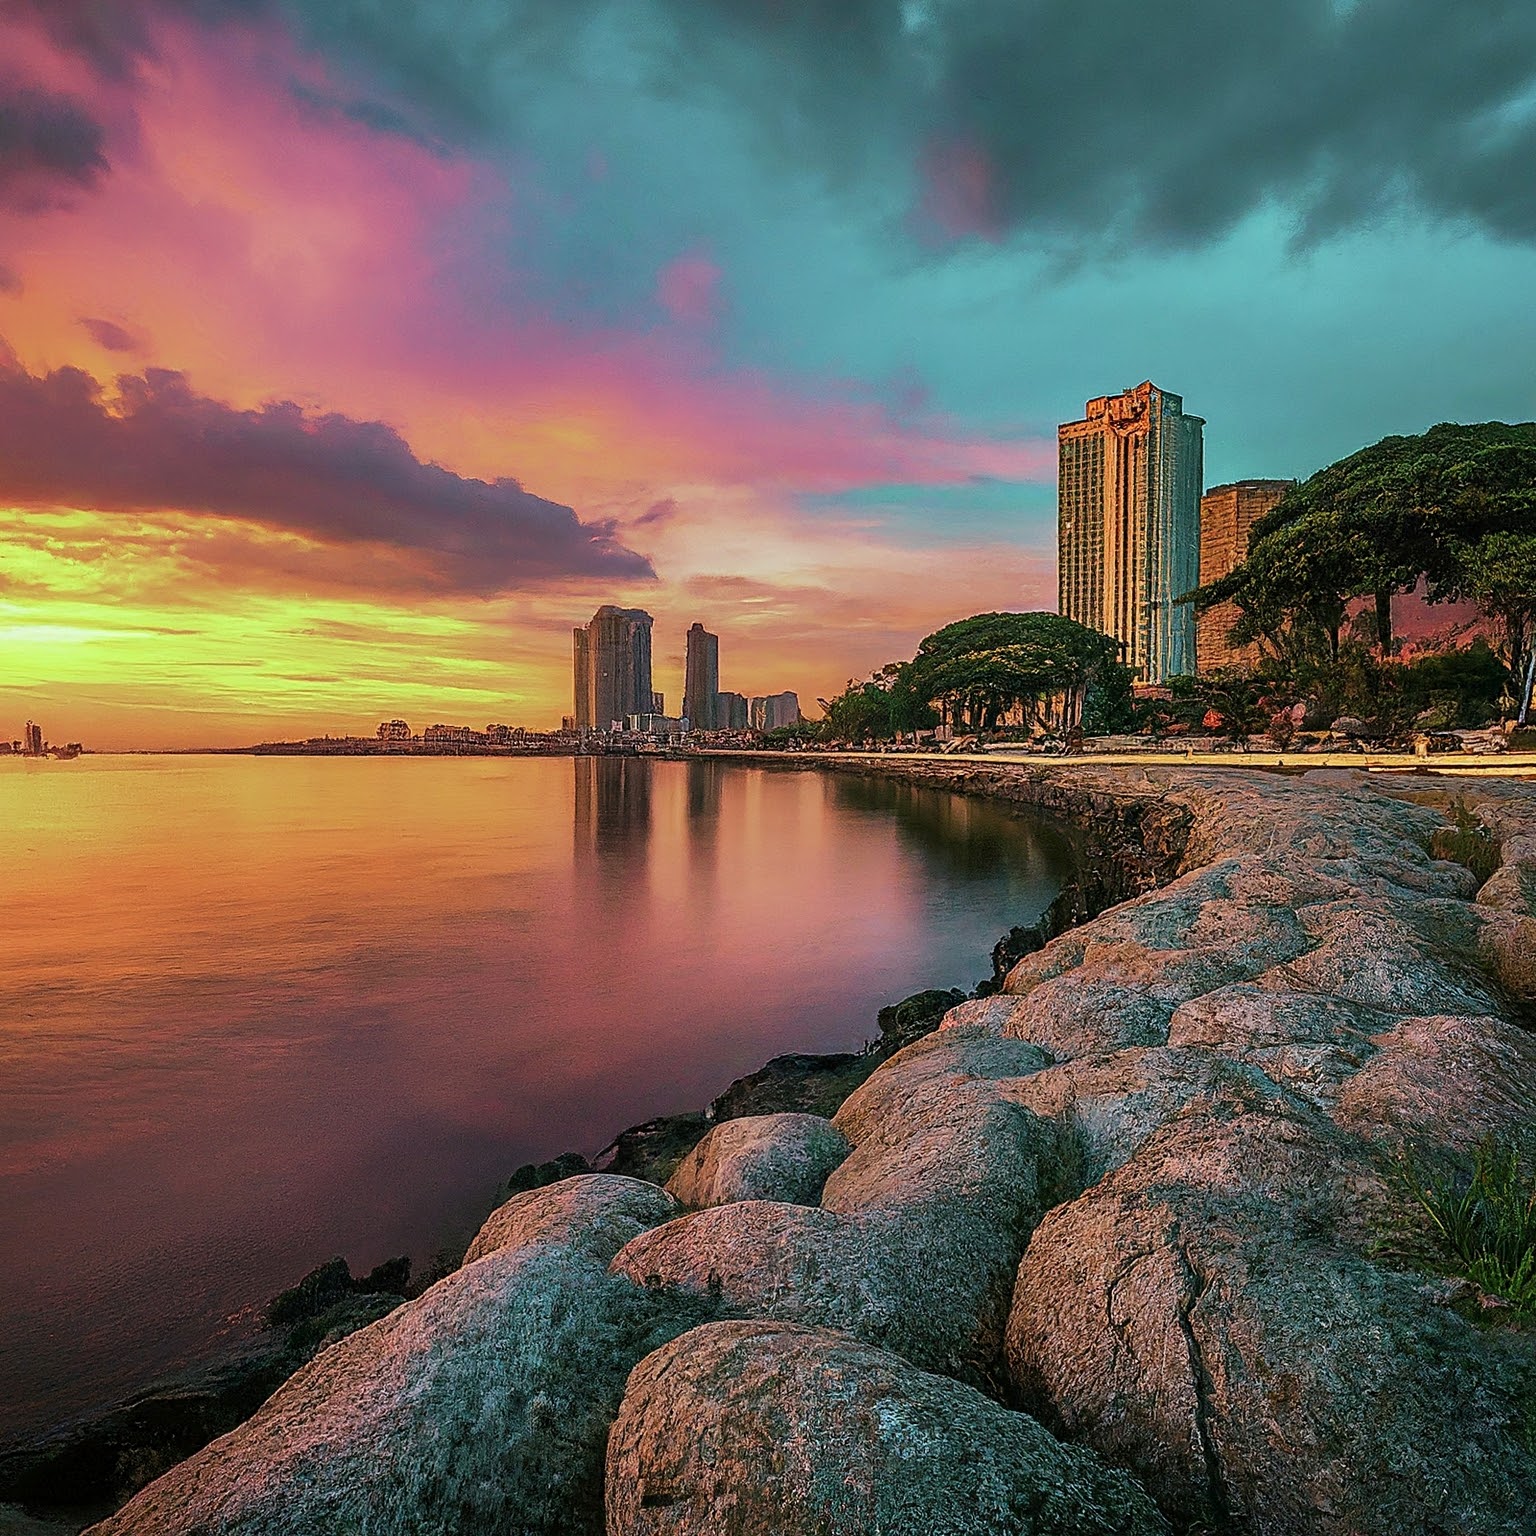 Manila Bay at sunset with colorful sky, Roxas Boulevard, and Cultural Center of the Philippines.